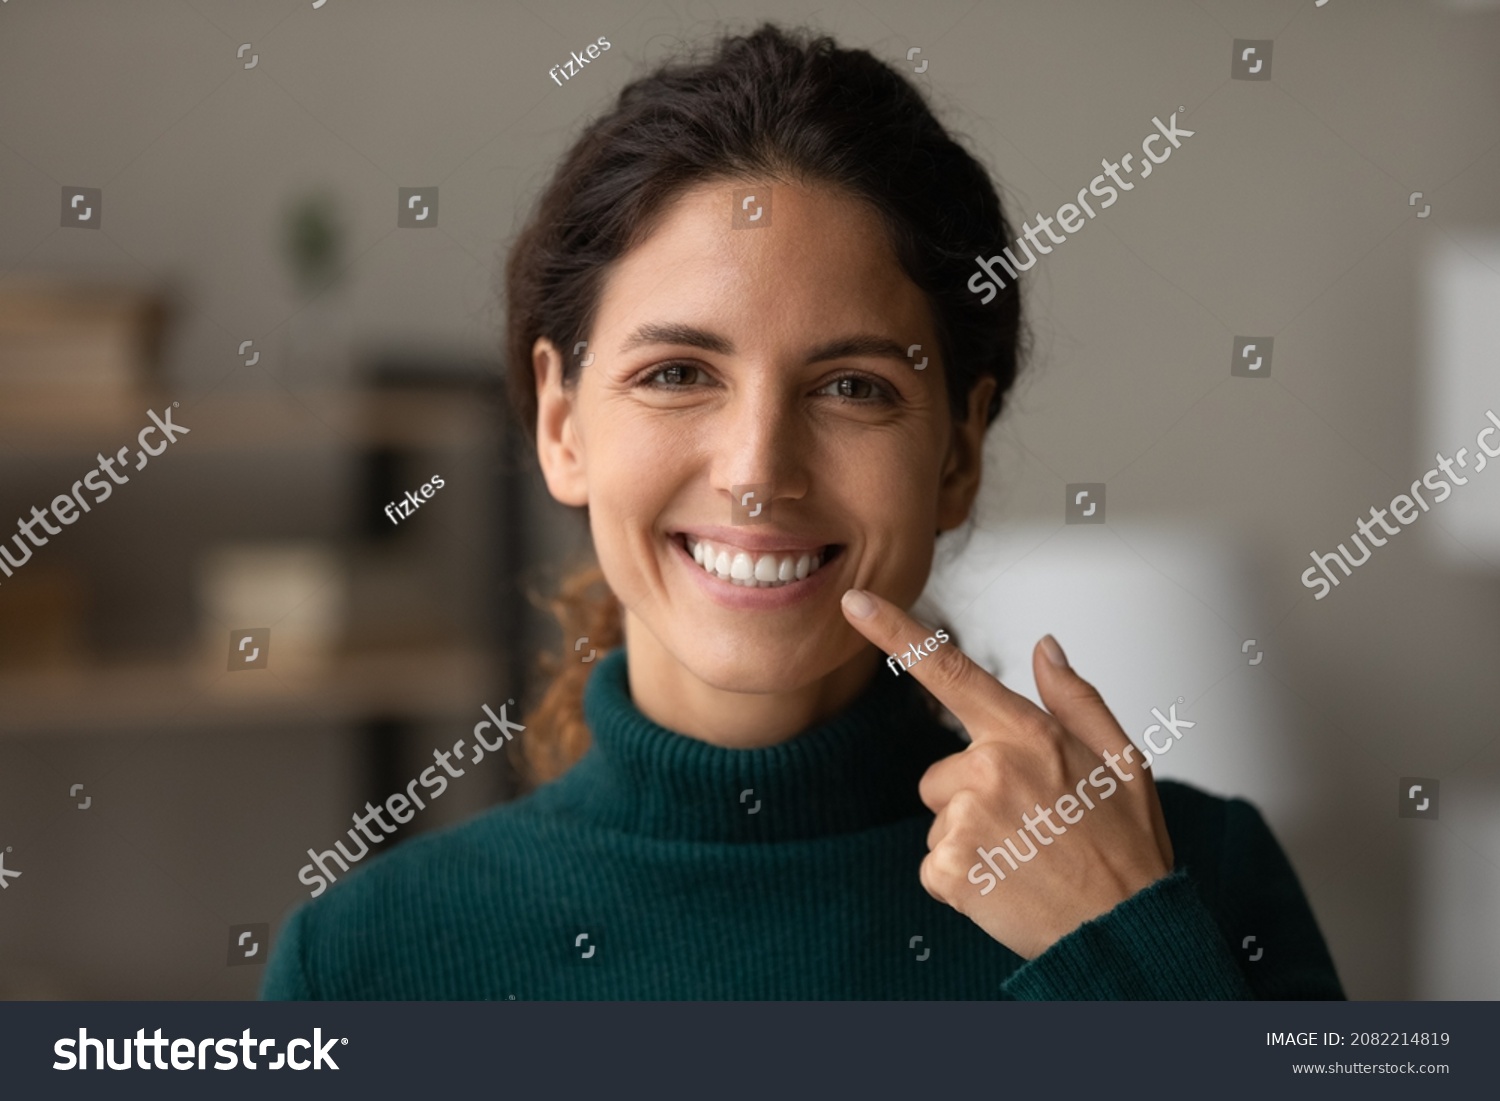 Shiny smile. Portrait of young happy hispanic woman satisfied patient of dental clinic. Millennial lady enjoy perfect result of orthodontic care procedures look at camera point on white straight teeth #2082214819